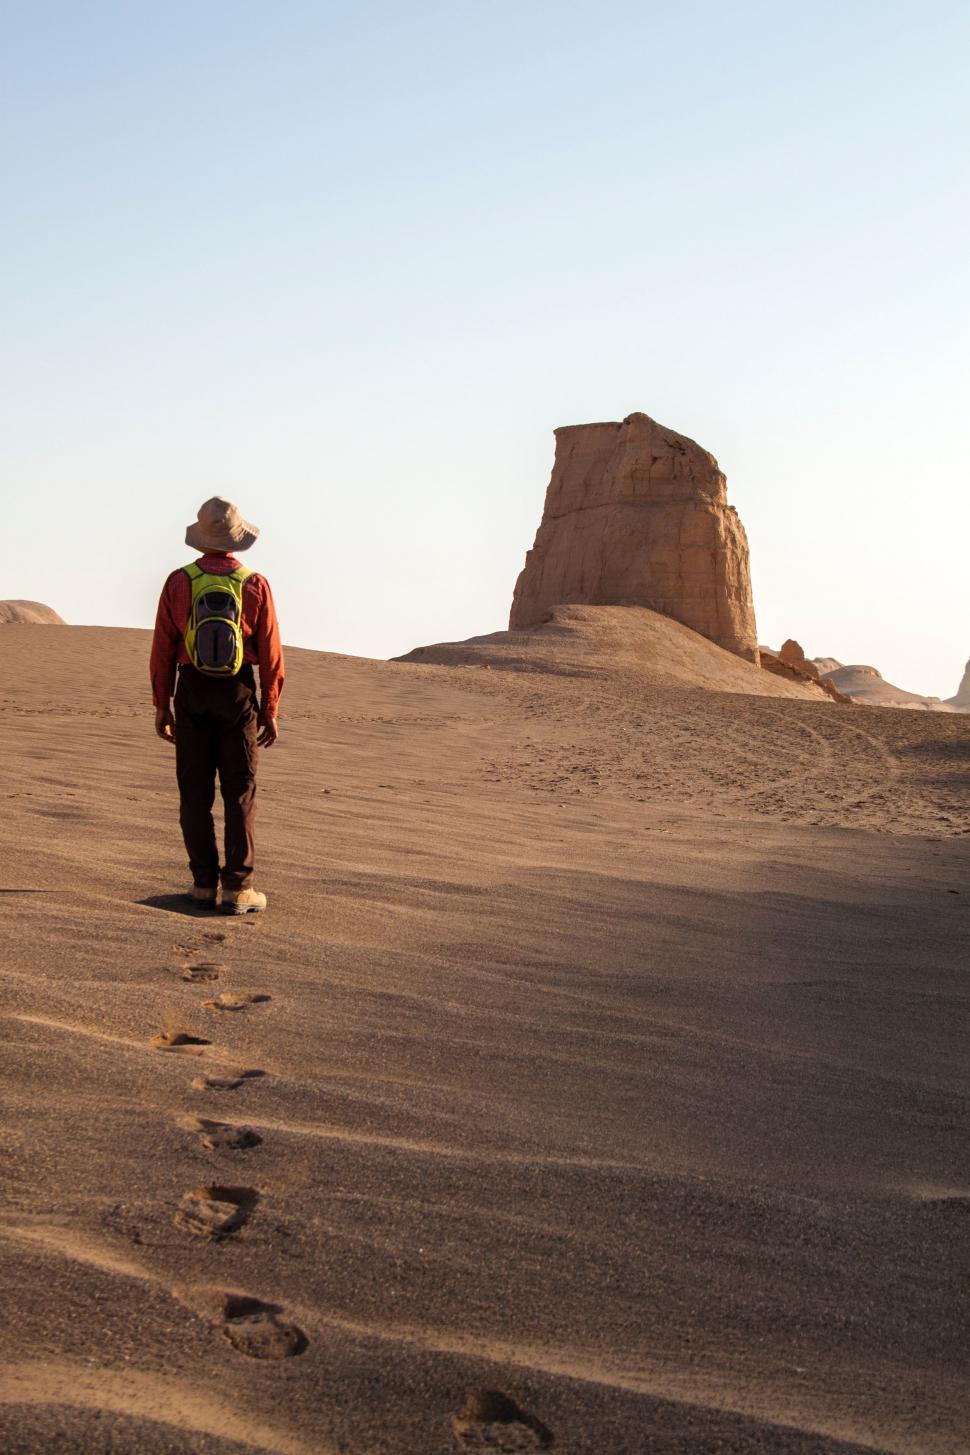 Free Image of Man Walking With Backpack in Desert 